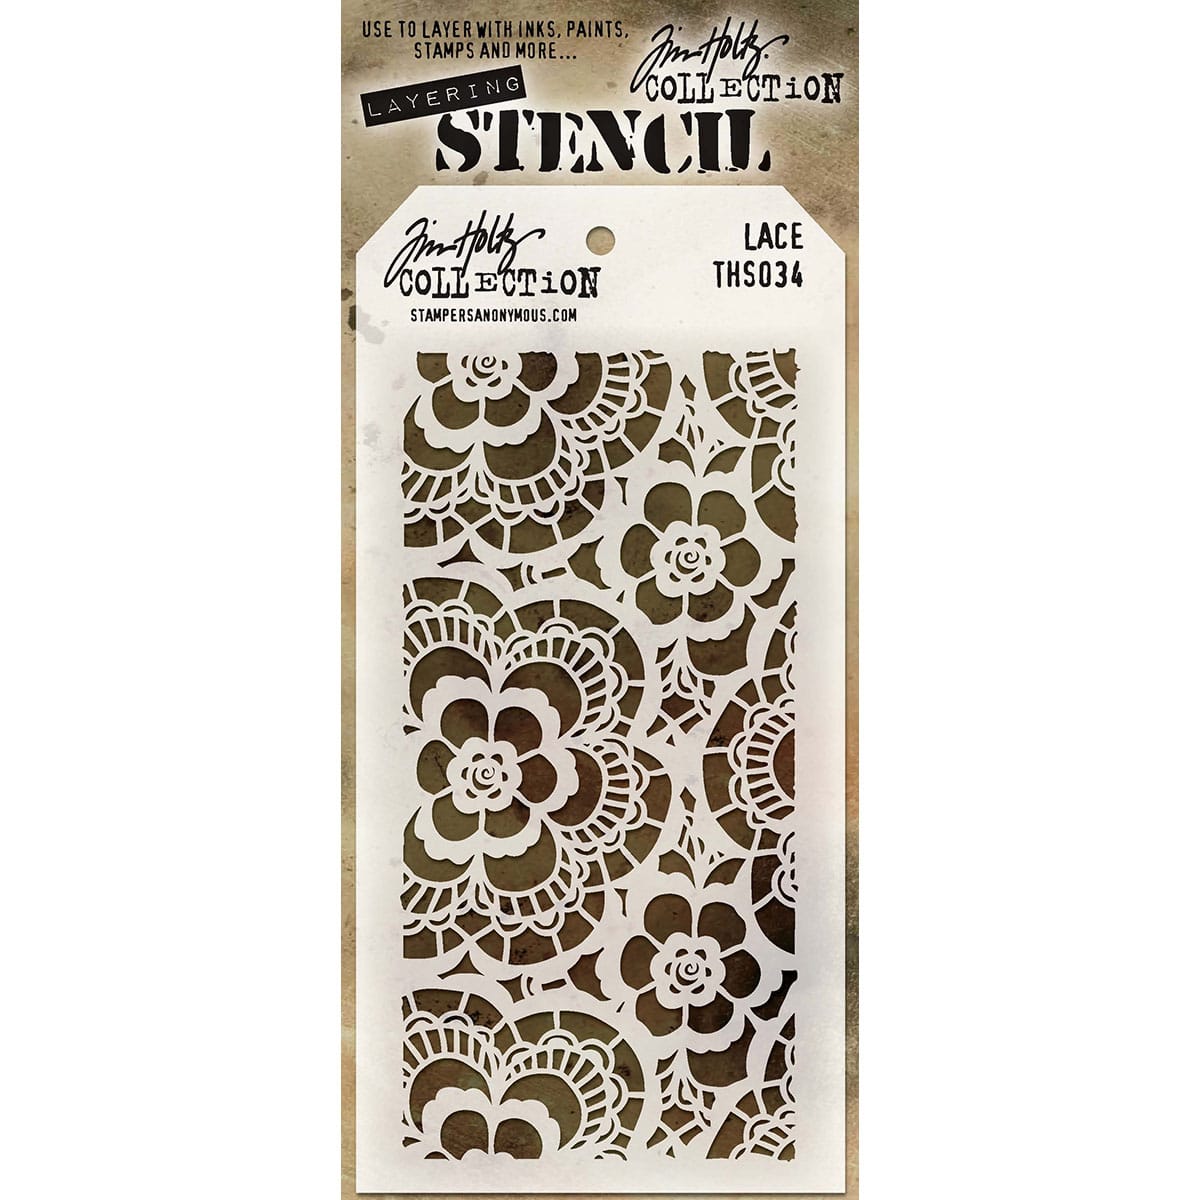 Stampers Anonymous Tim Holtz® Lace Layered Stencil, 4 x 8.5